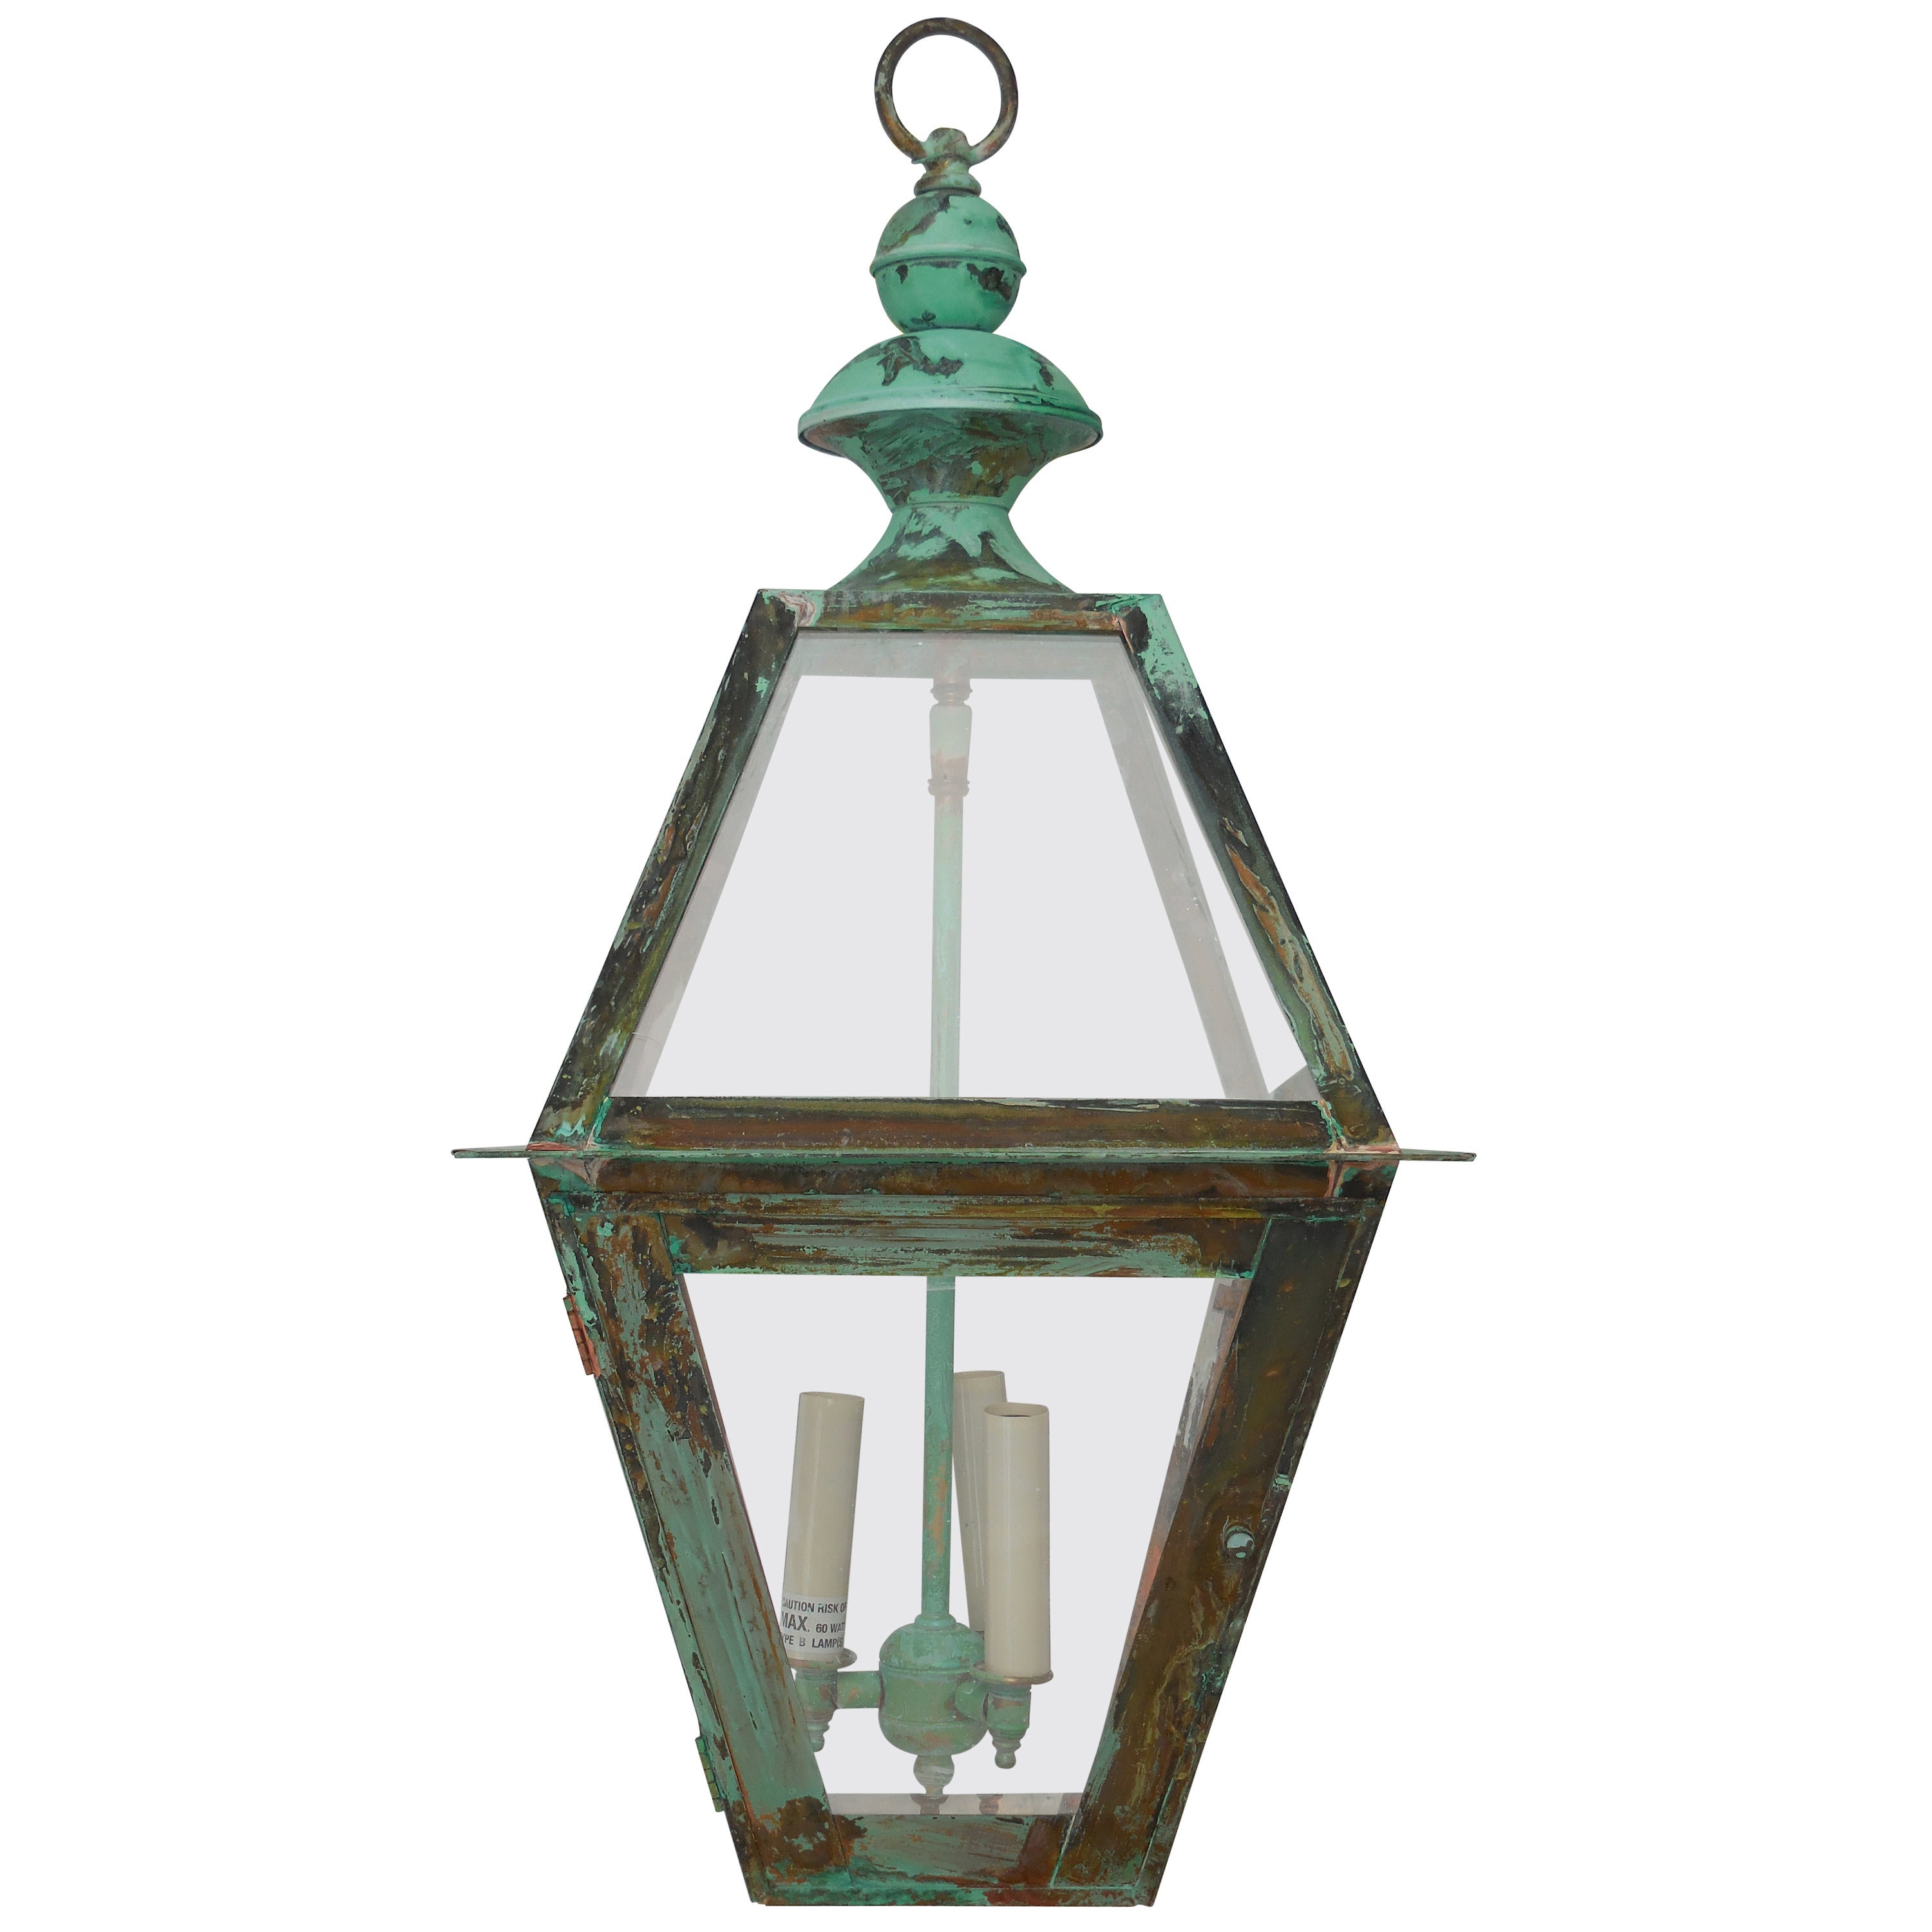 Four-Sided Hanging Copper Lantern